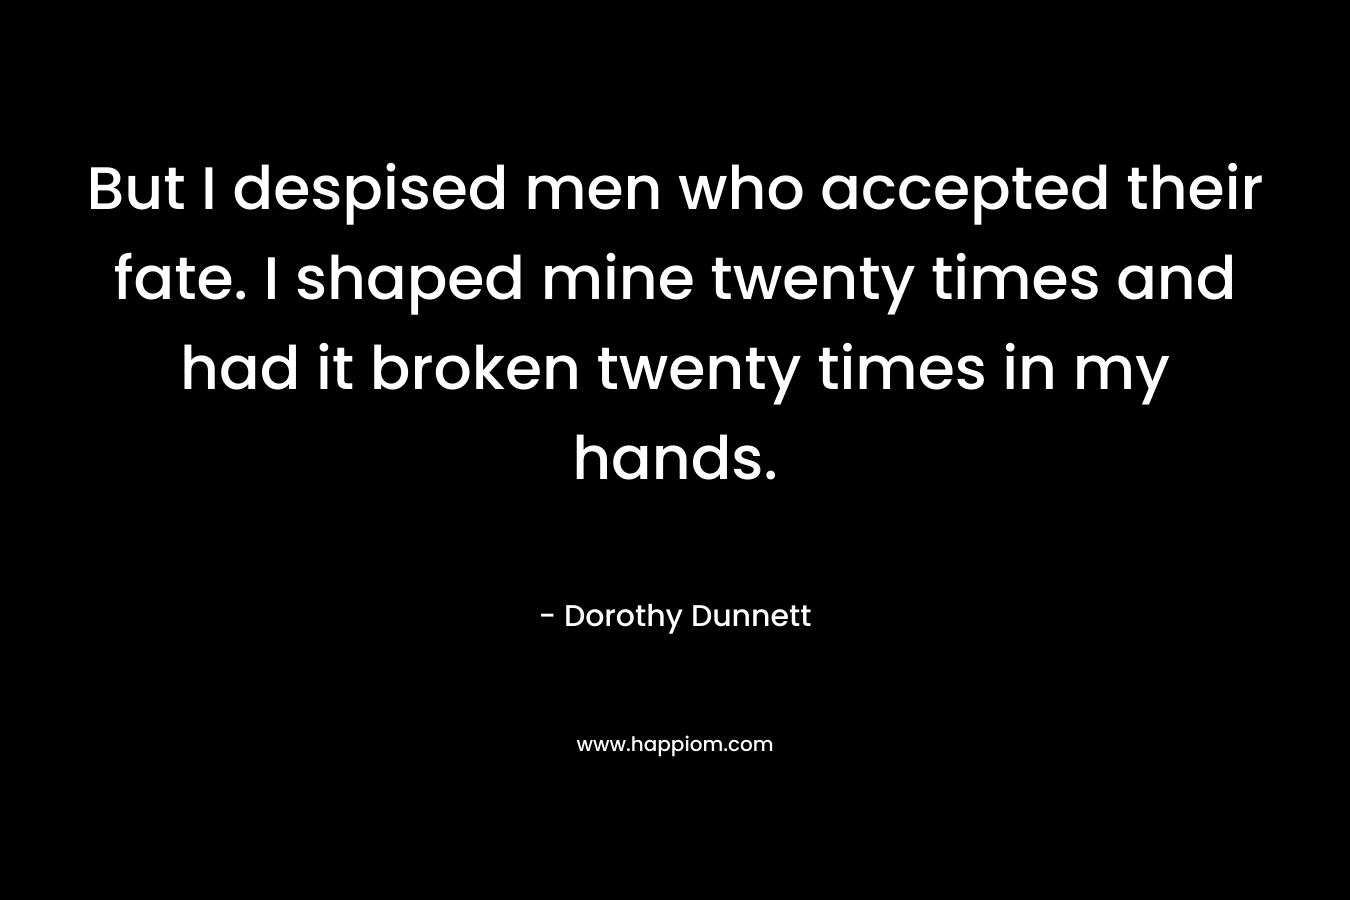 But I despised men who accepted their fate. I shaped mine twenty times and had it broken twenty times in my hands. – Dorothy Dunnett